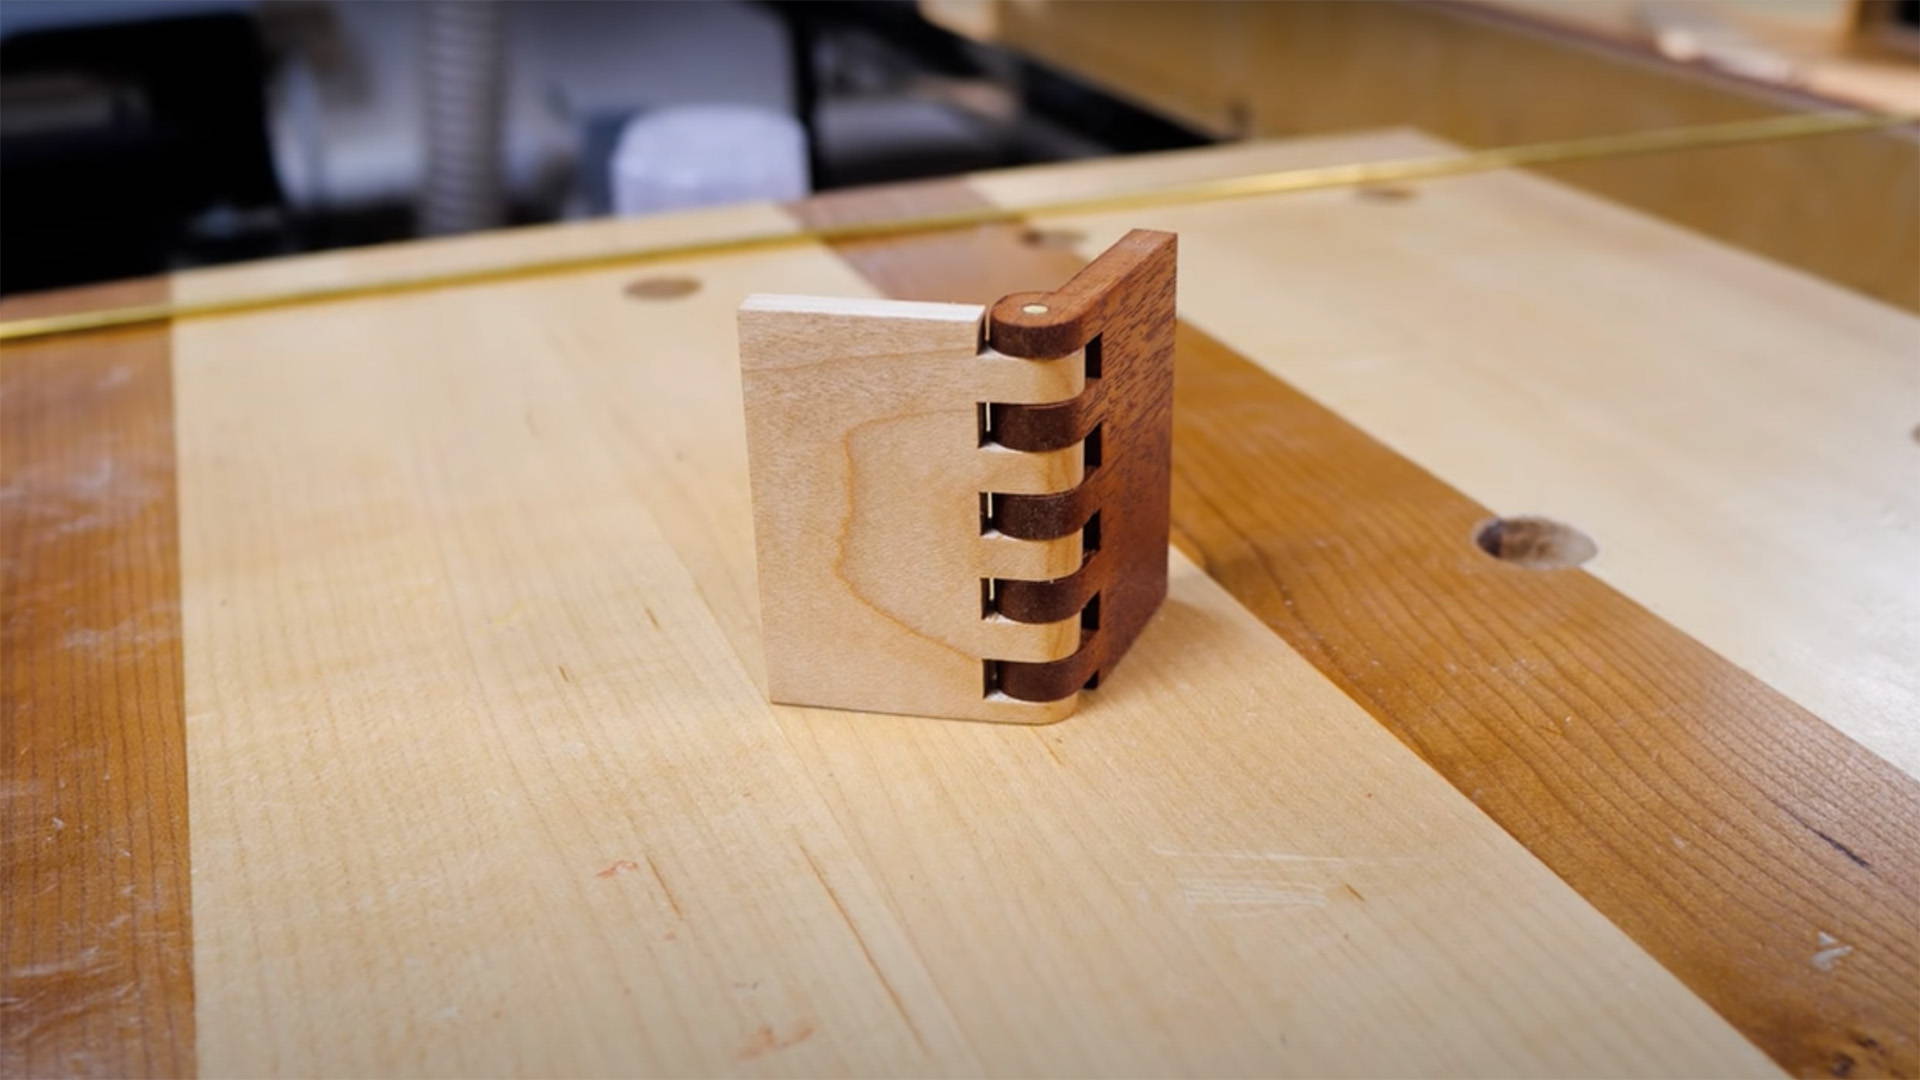 How to Make Simple Wooden Hinges With a Box Joint Jig